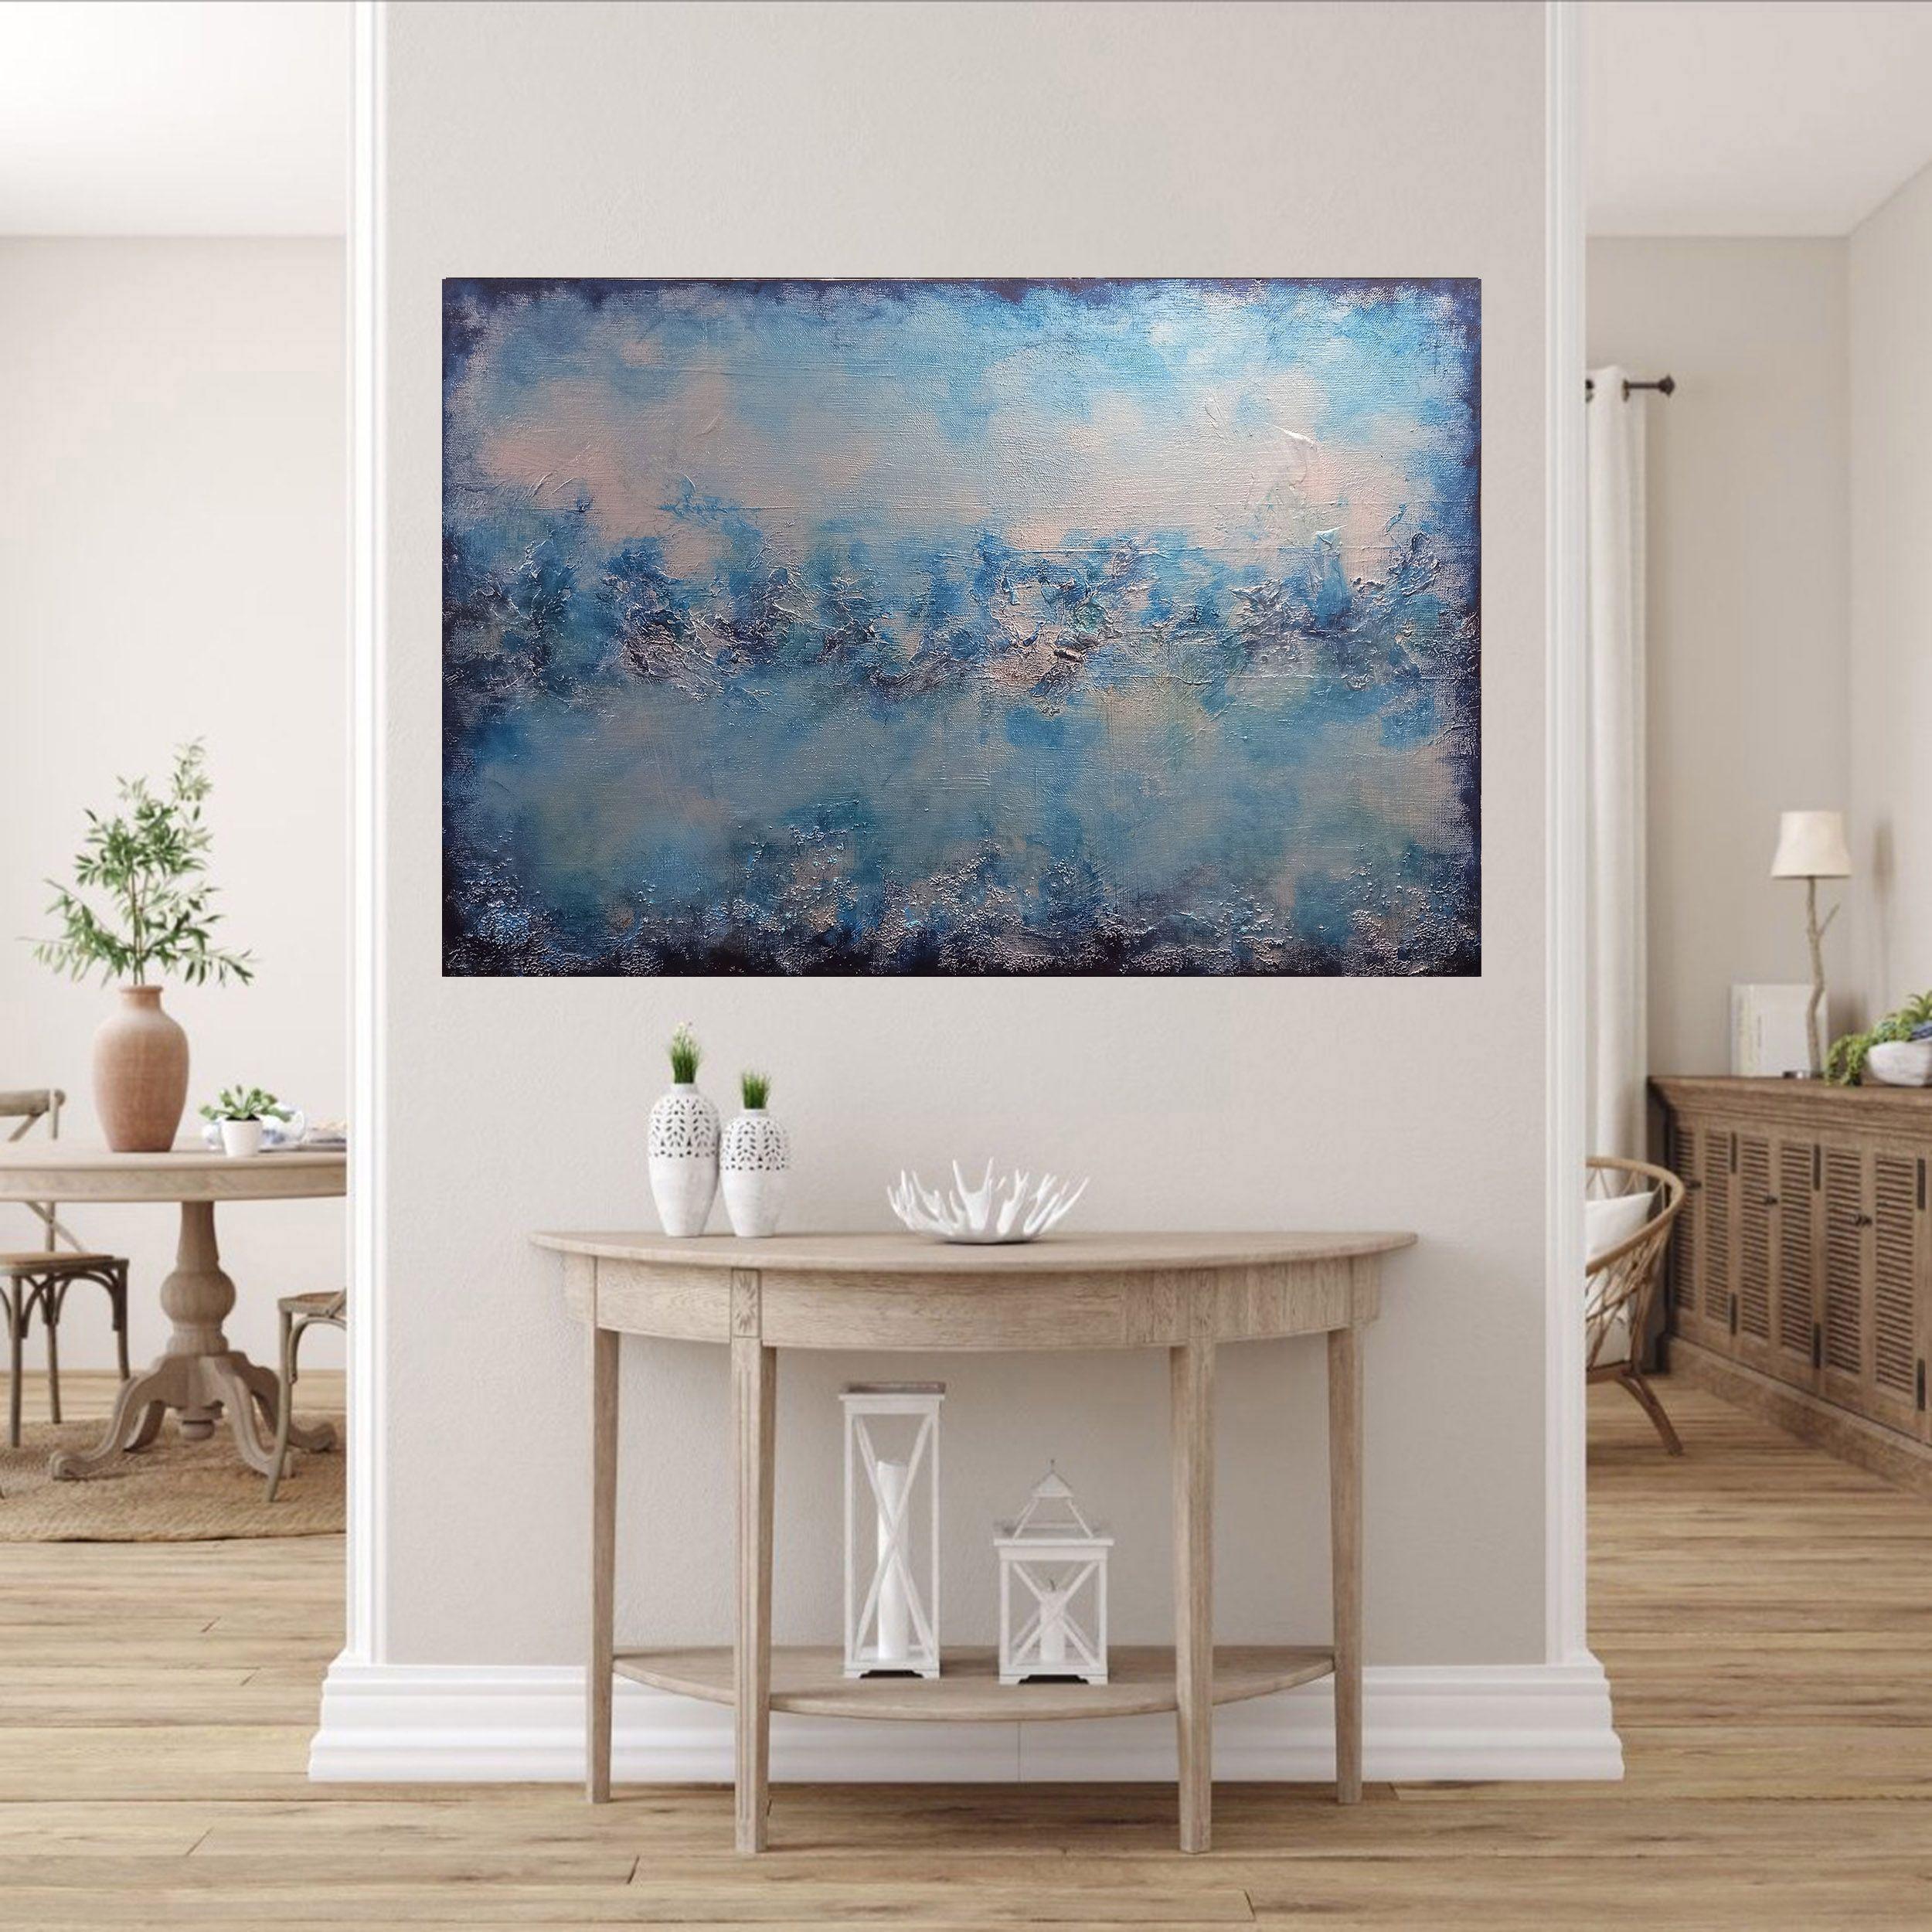 XL Blue Bay 76 x 51cm Textured Abstract Painting, Painting, Acrylic on Canvas For Sale 1